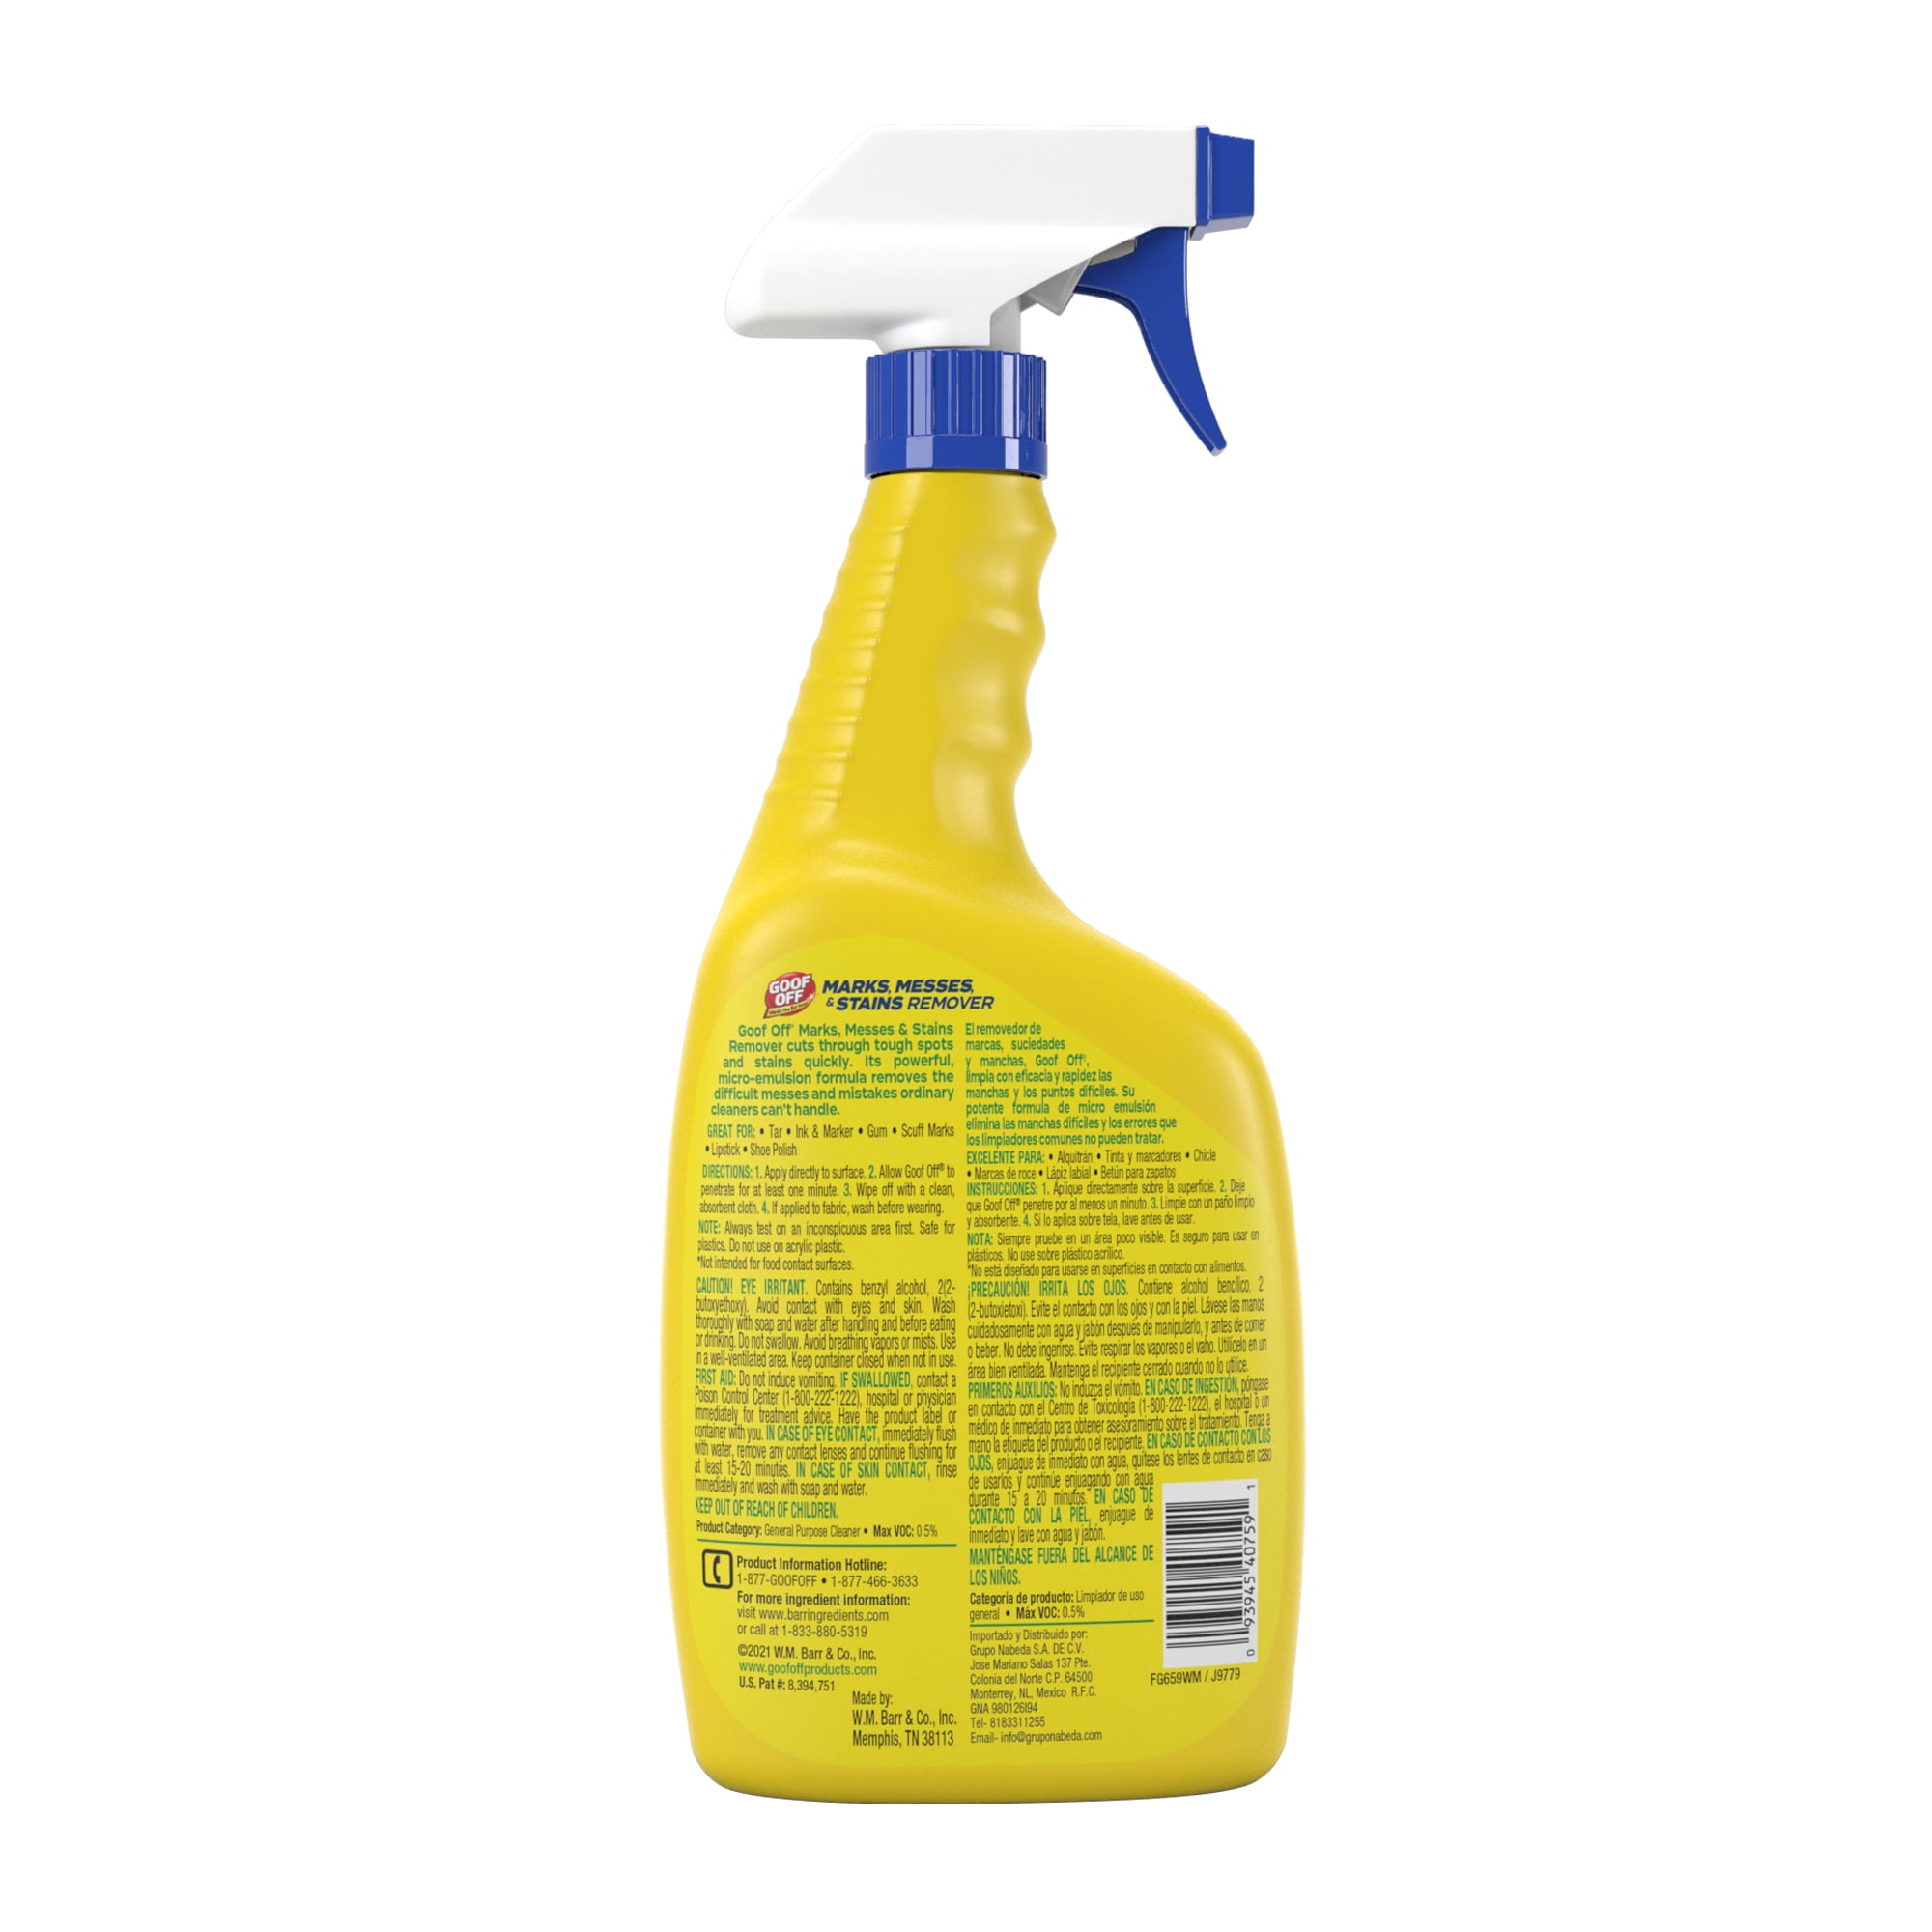 Goof Off 22 Oz. Trigger Spray Household Heavy-Duty Remover - Town Hardware  & General Store